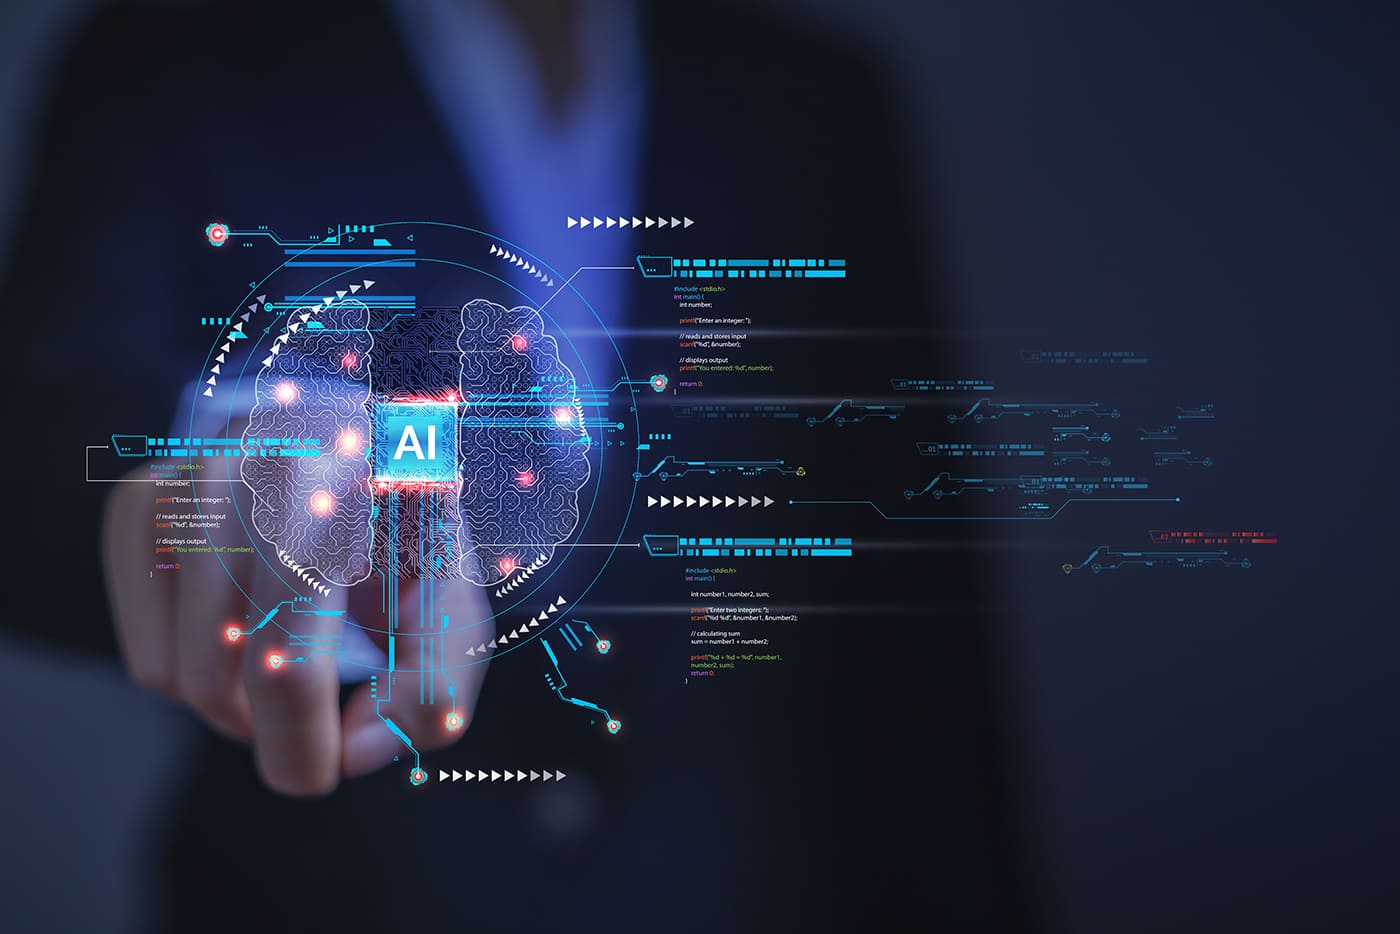 Bringing Real-Time AI To The Core Of Your Business | Bernard Marr